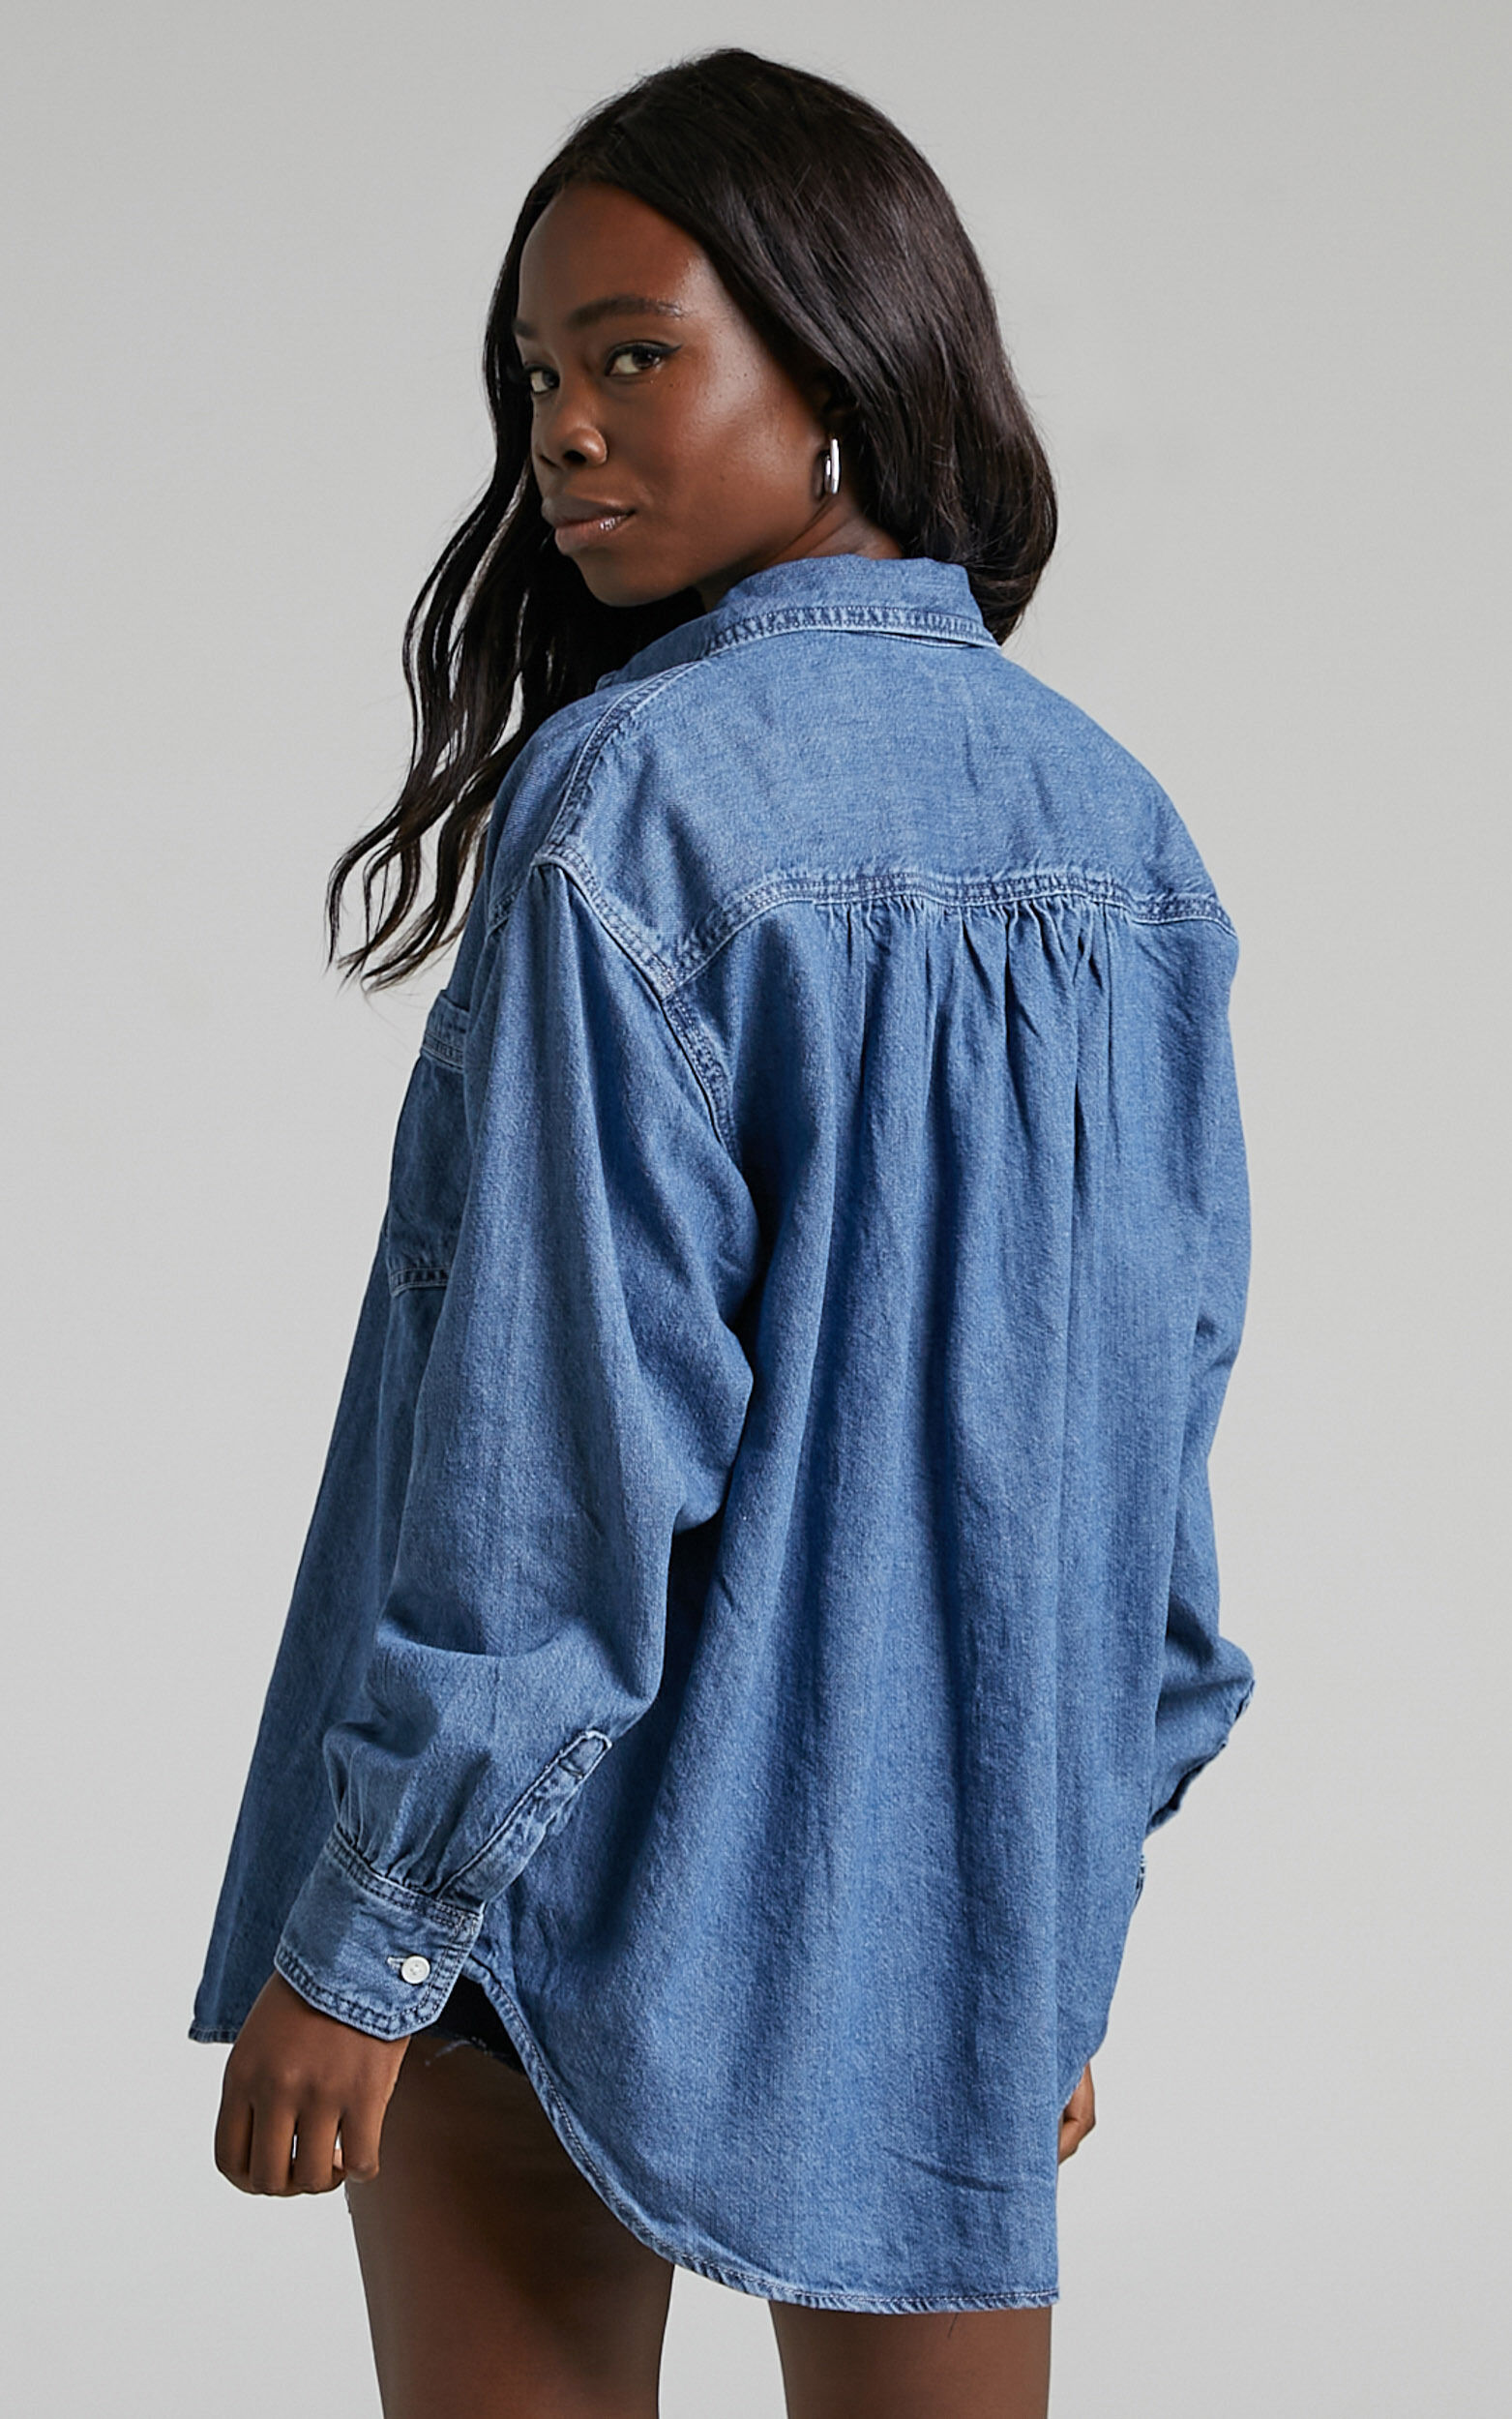 Levi's - Remi Utility Shirt in Quite Frankly | Showpo USA